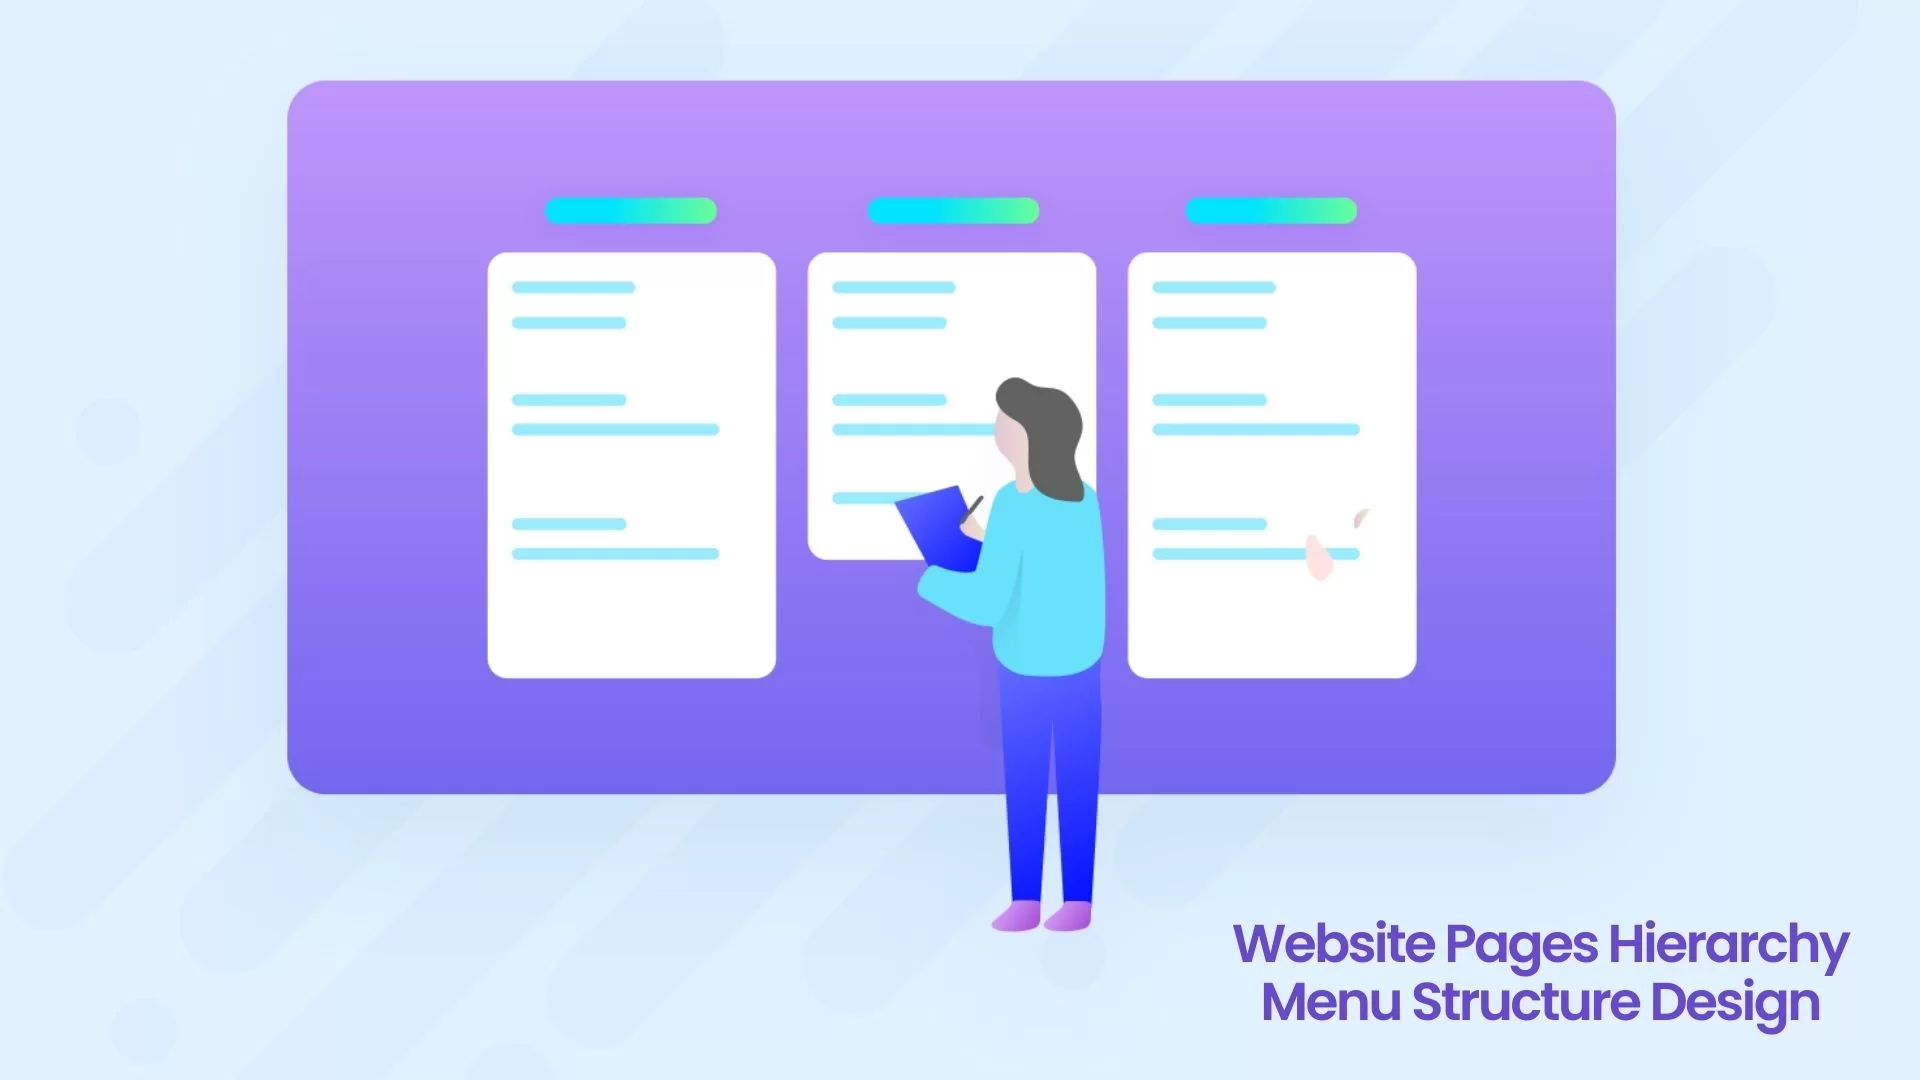 The Best Practices To Structure Website Pages Hierarchy Menu